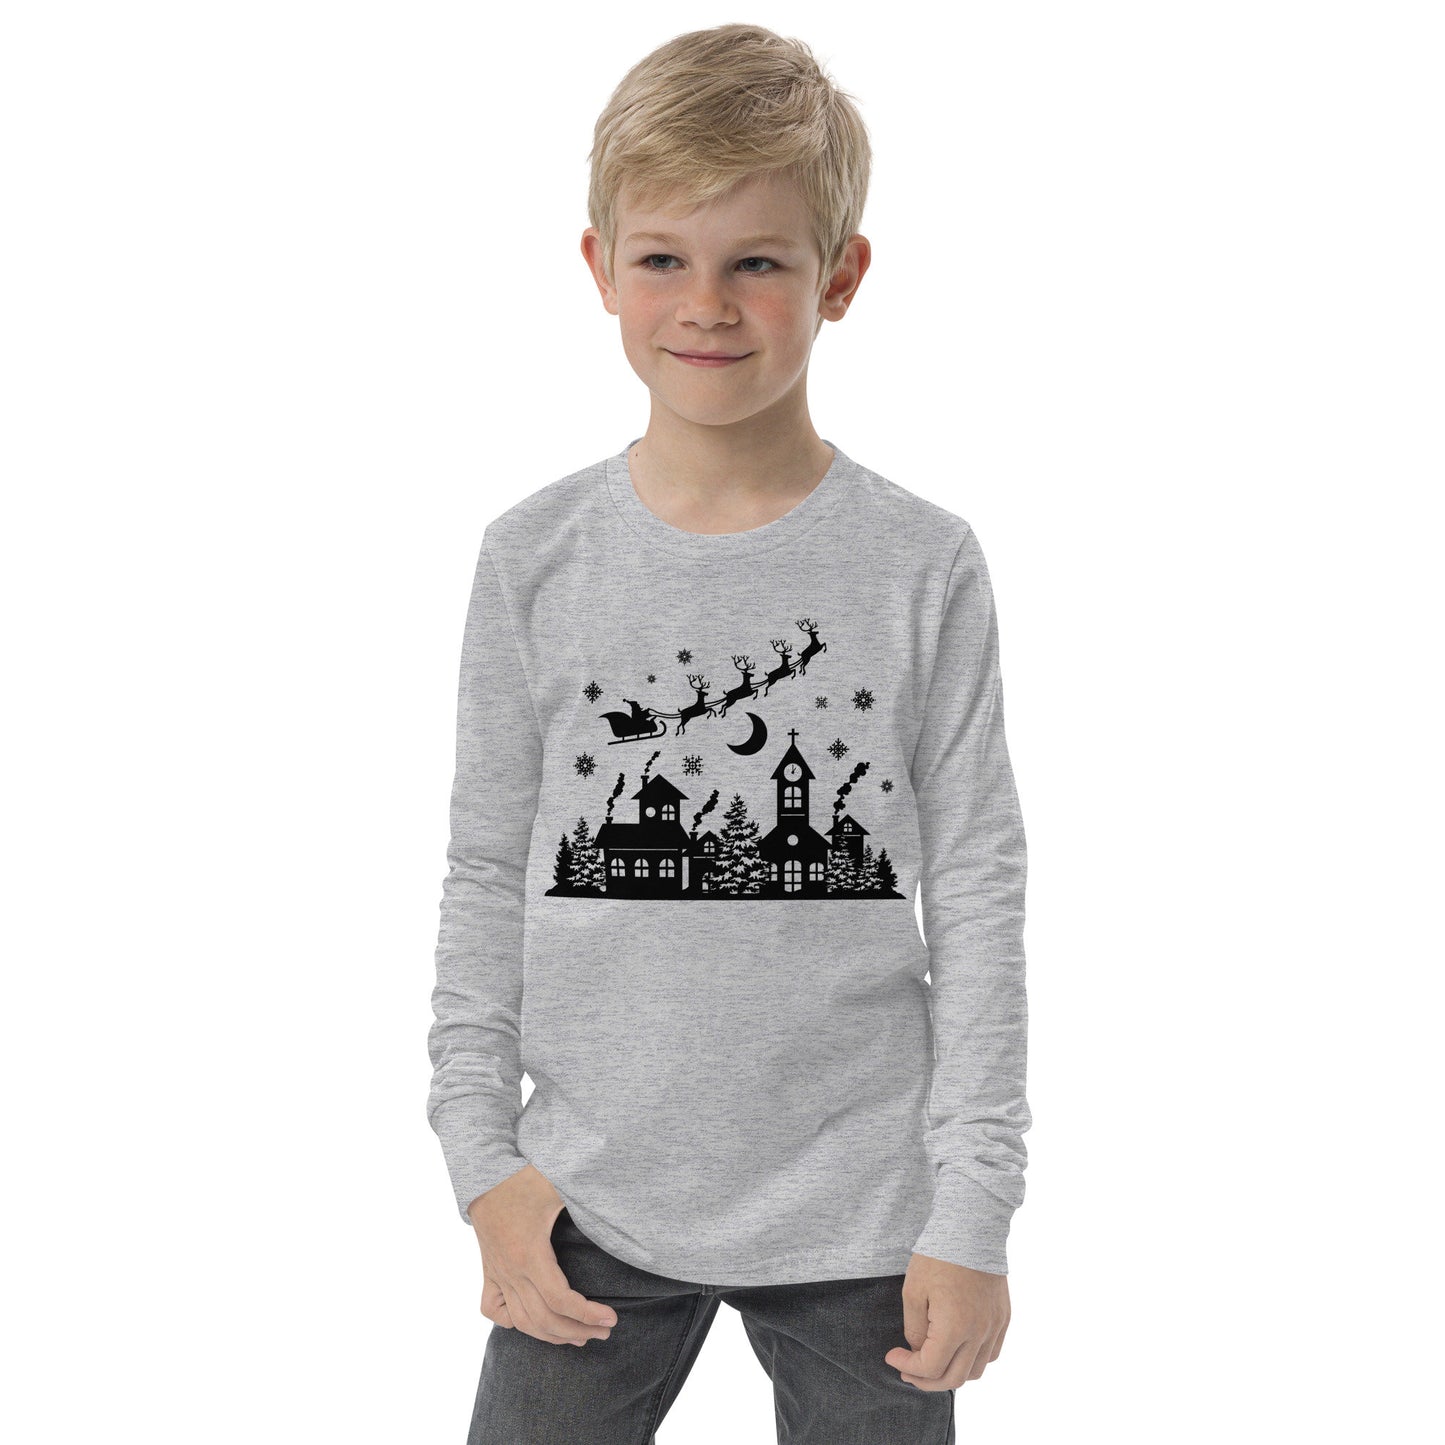 Old Town Silhouette - Santa Riding over in Sleigh with Reindeer - Youth long sleeve tee